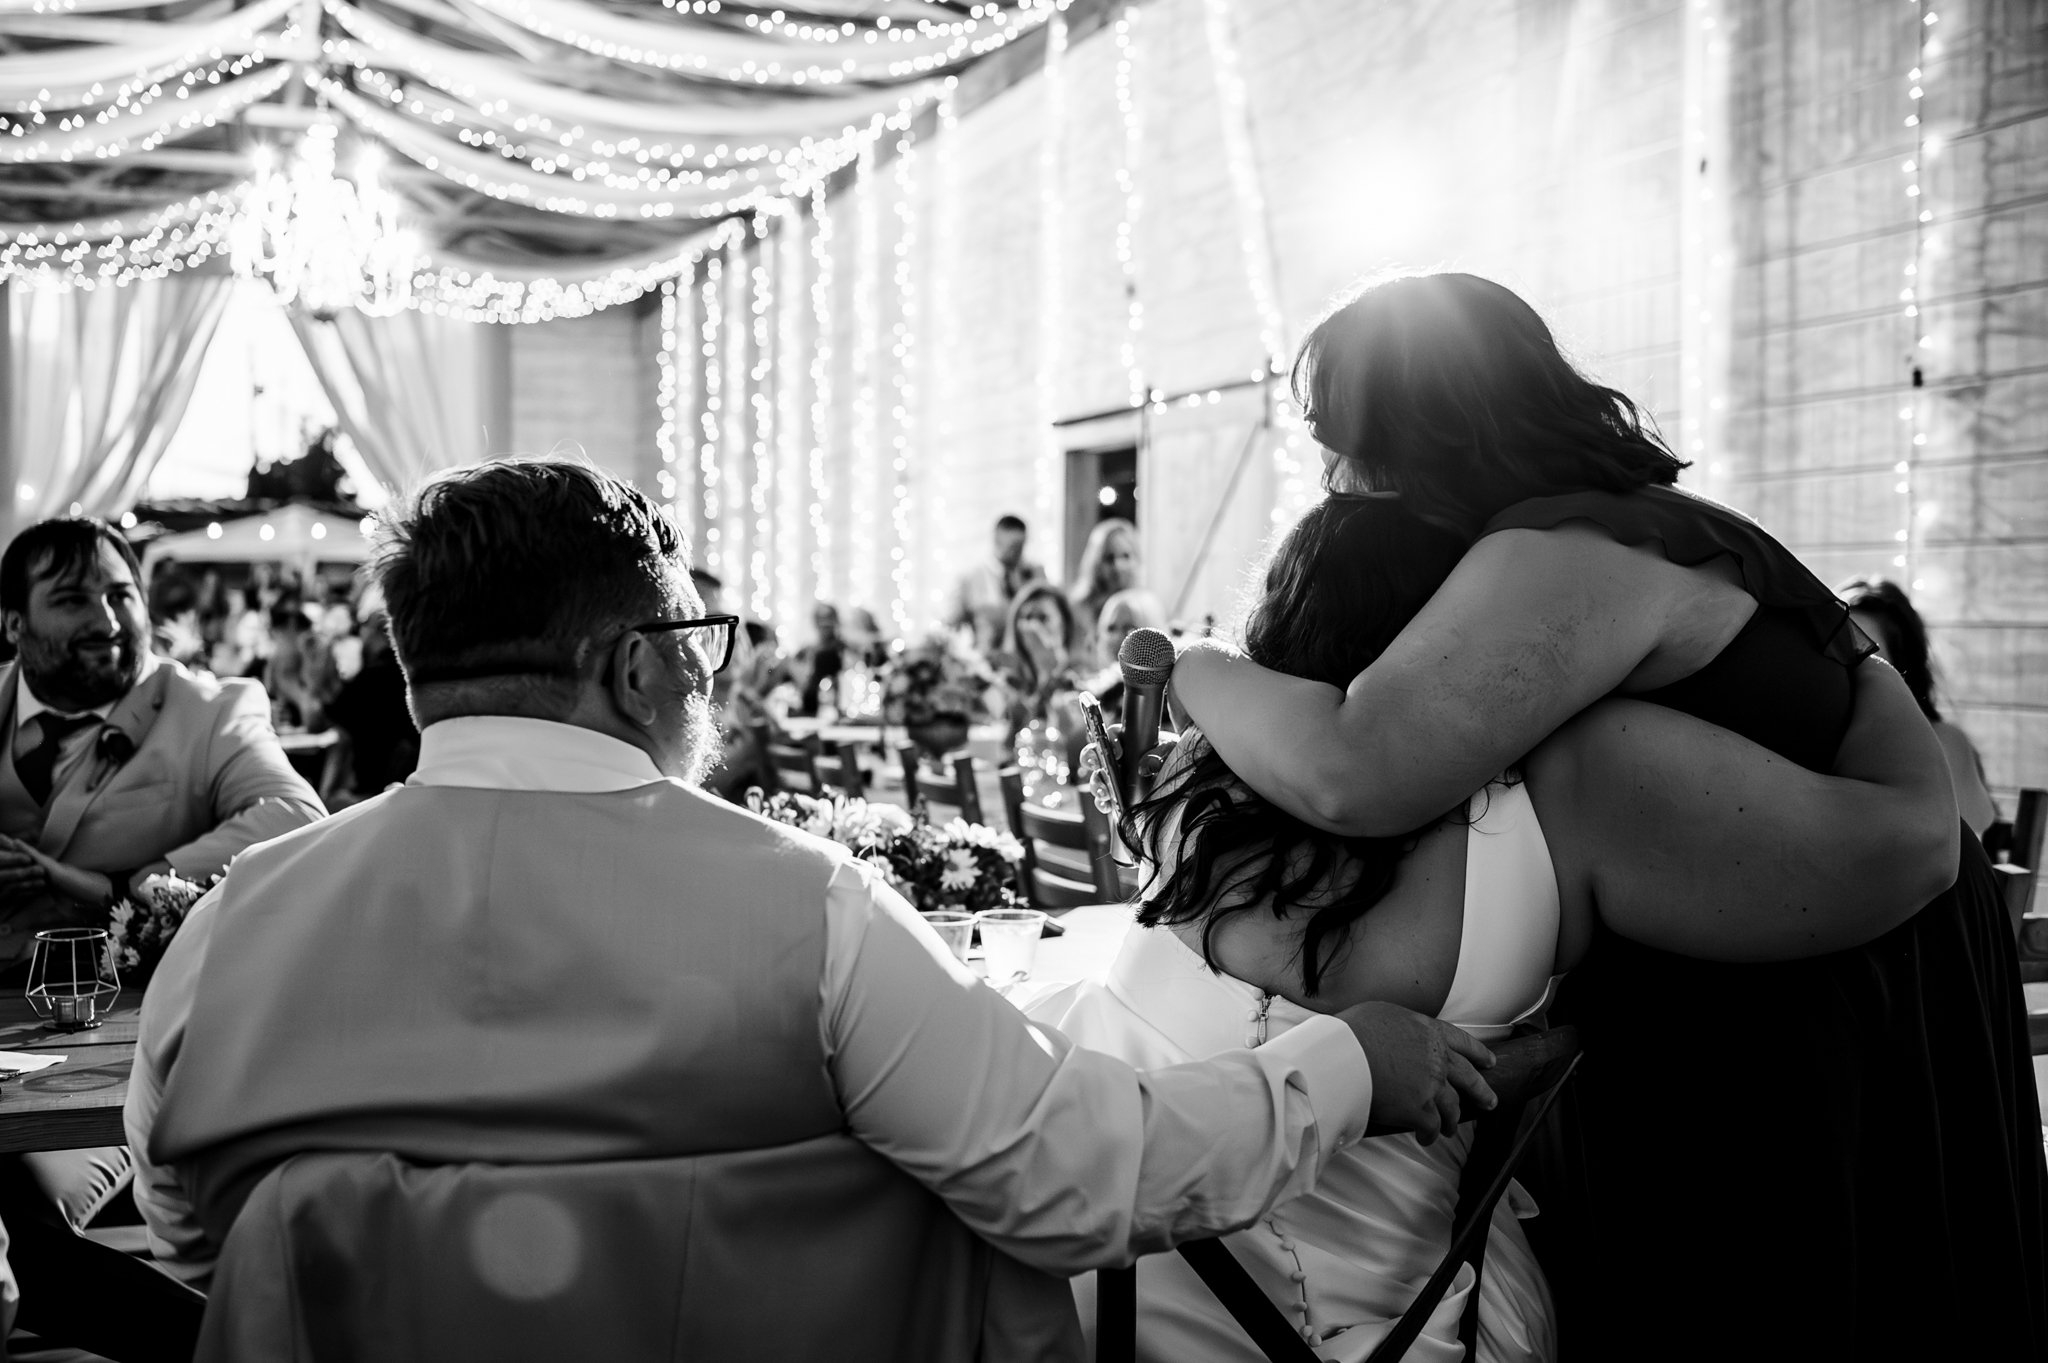 A bride and groom hugging at a wedding reception captured in photography.